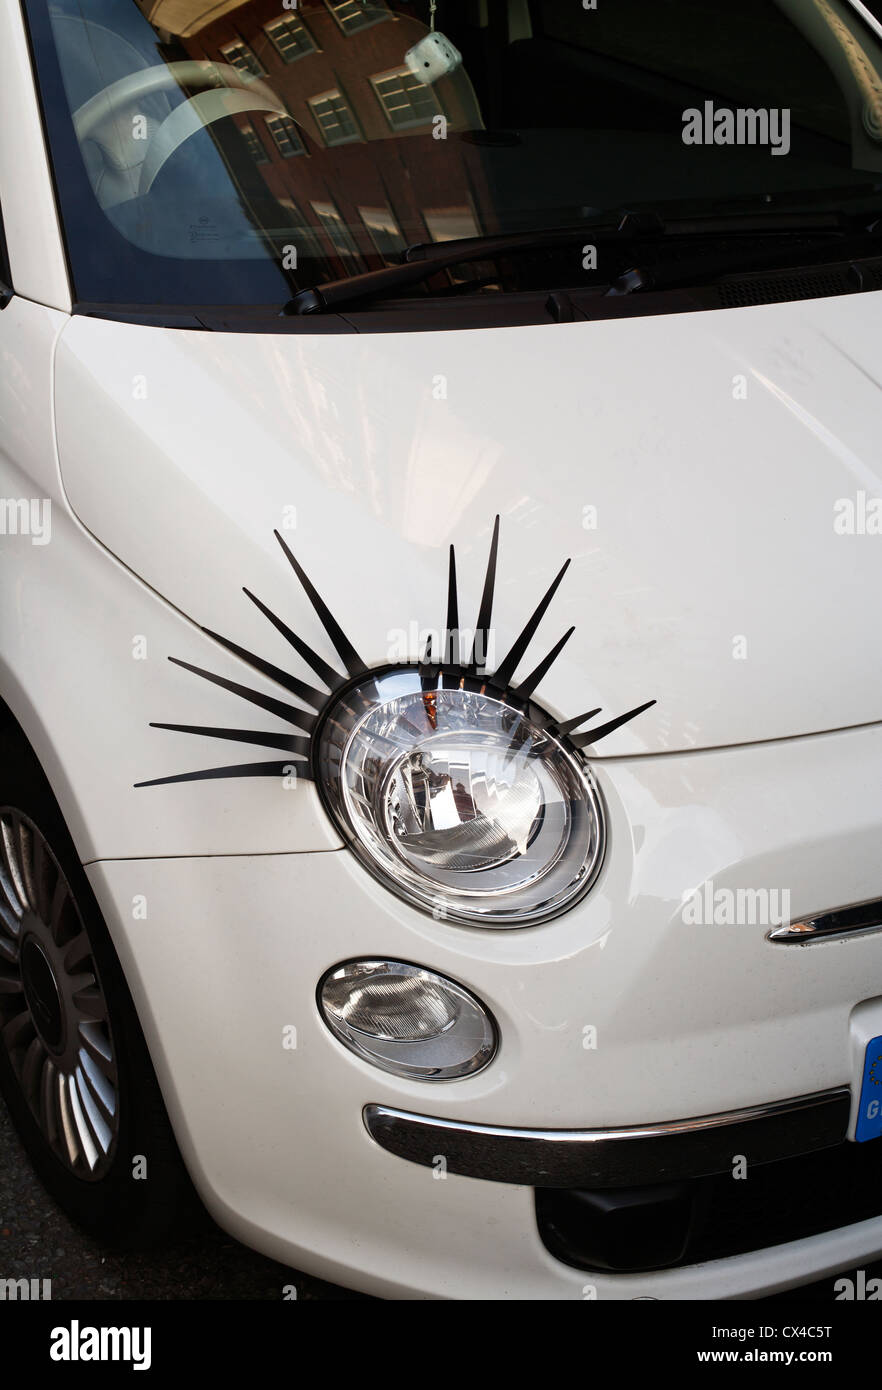 Cute Eye-lashes accessories on Fiat Cinquecento, Melcombe Street, London, England, UK Stock Photo